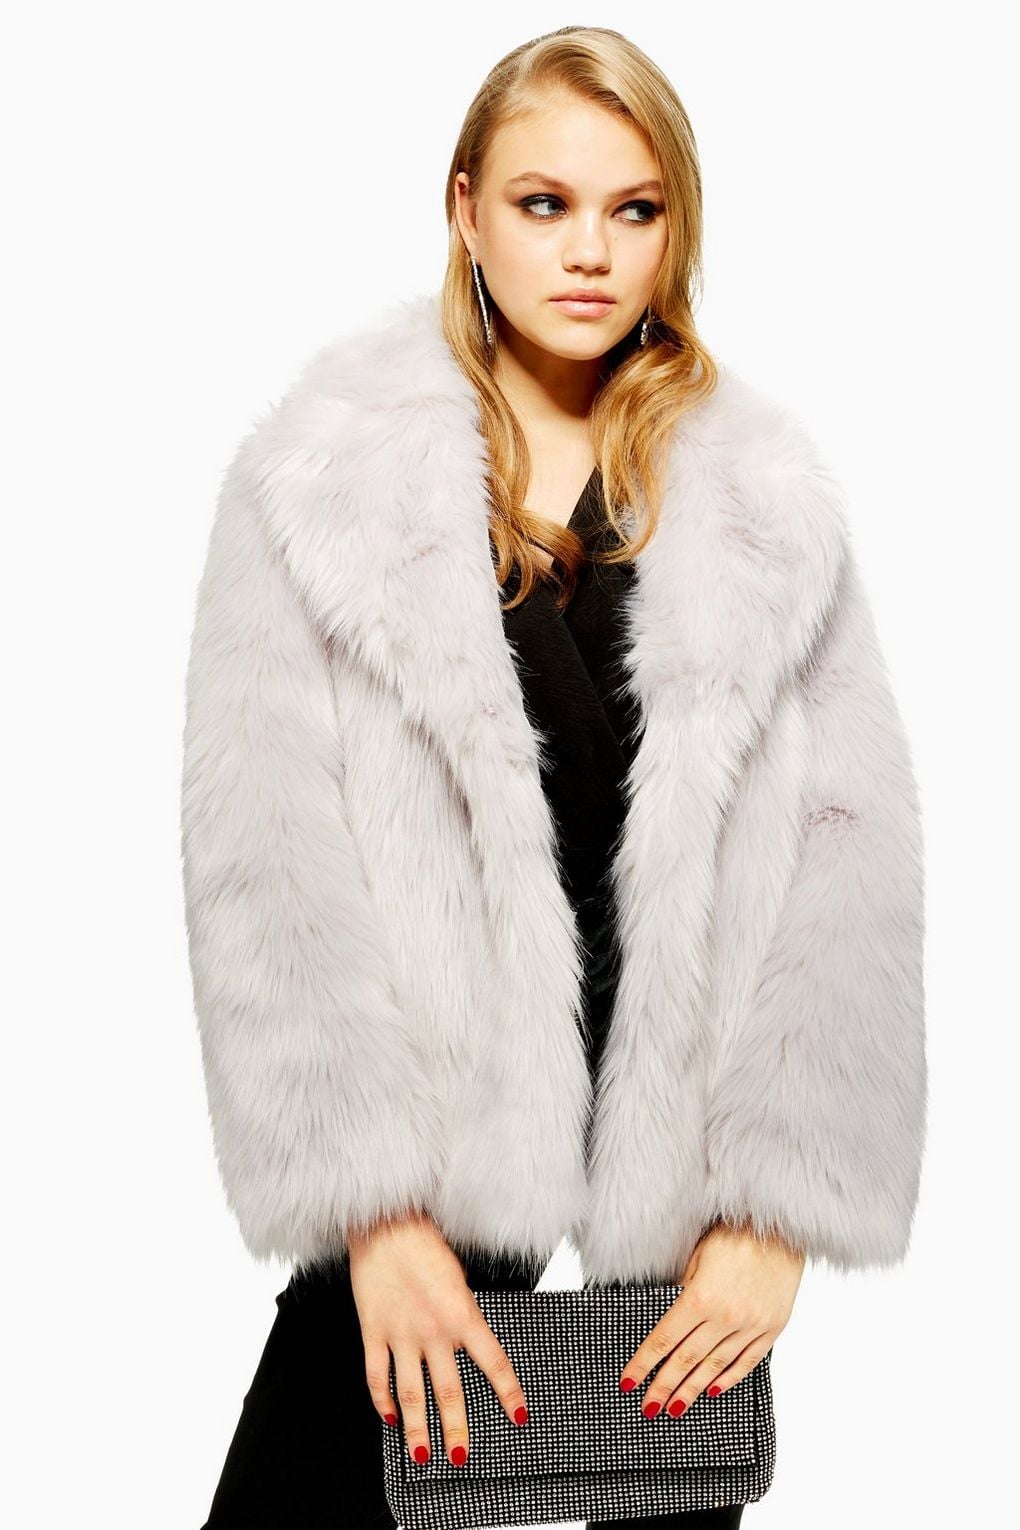 Topshop Petite Luxe Faux Fur Coat  8 Holiday Fashion Trends That